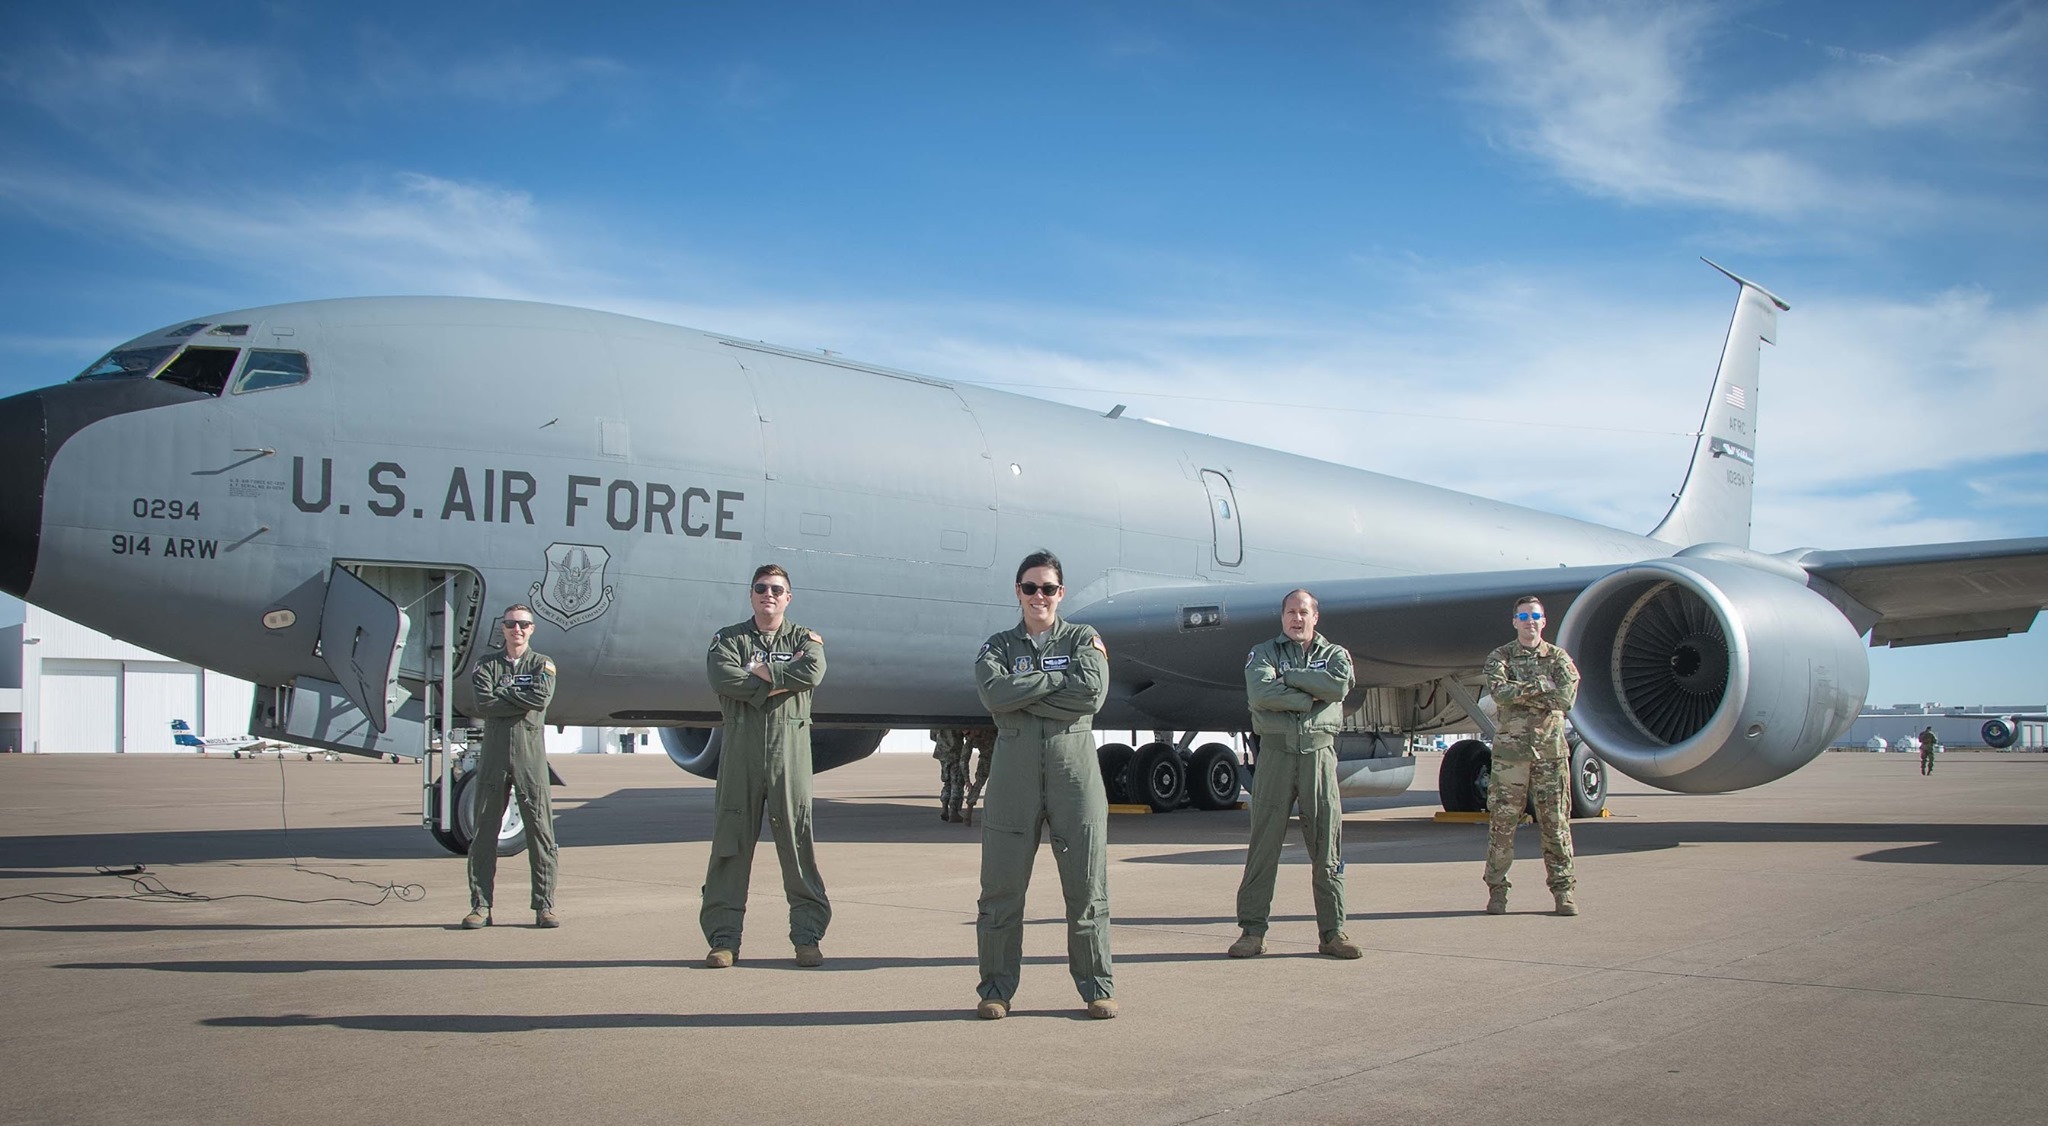 Aircrew and maintenance pose in front of a KC-135 Stratotanker aircraft.